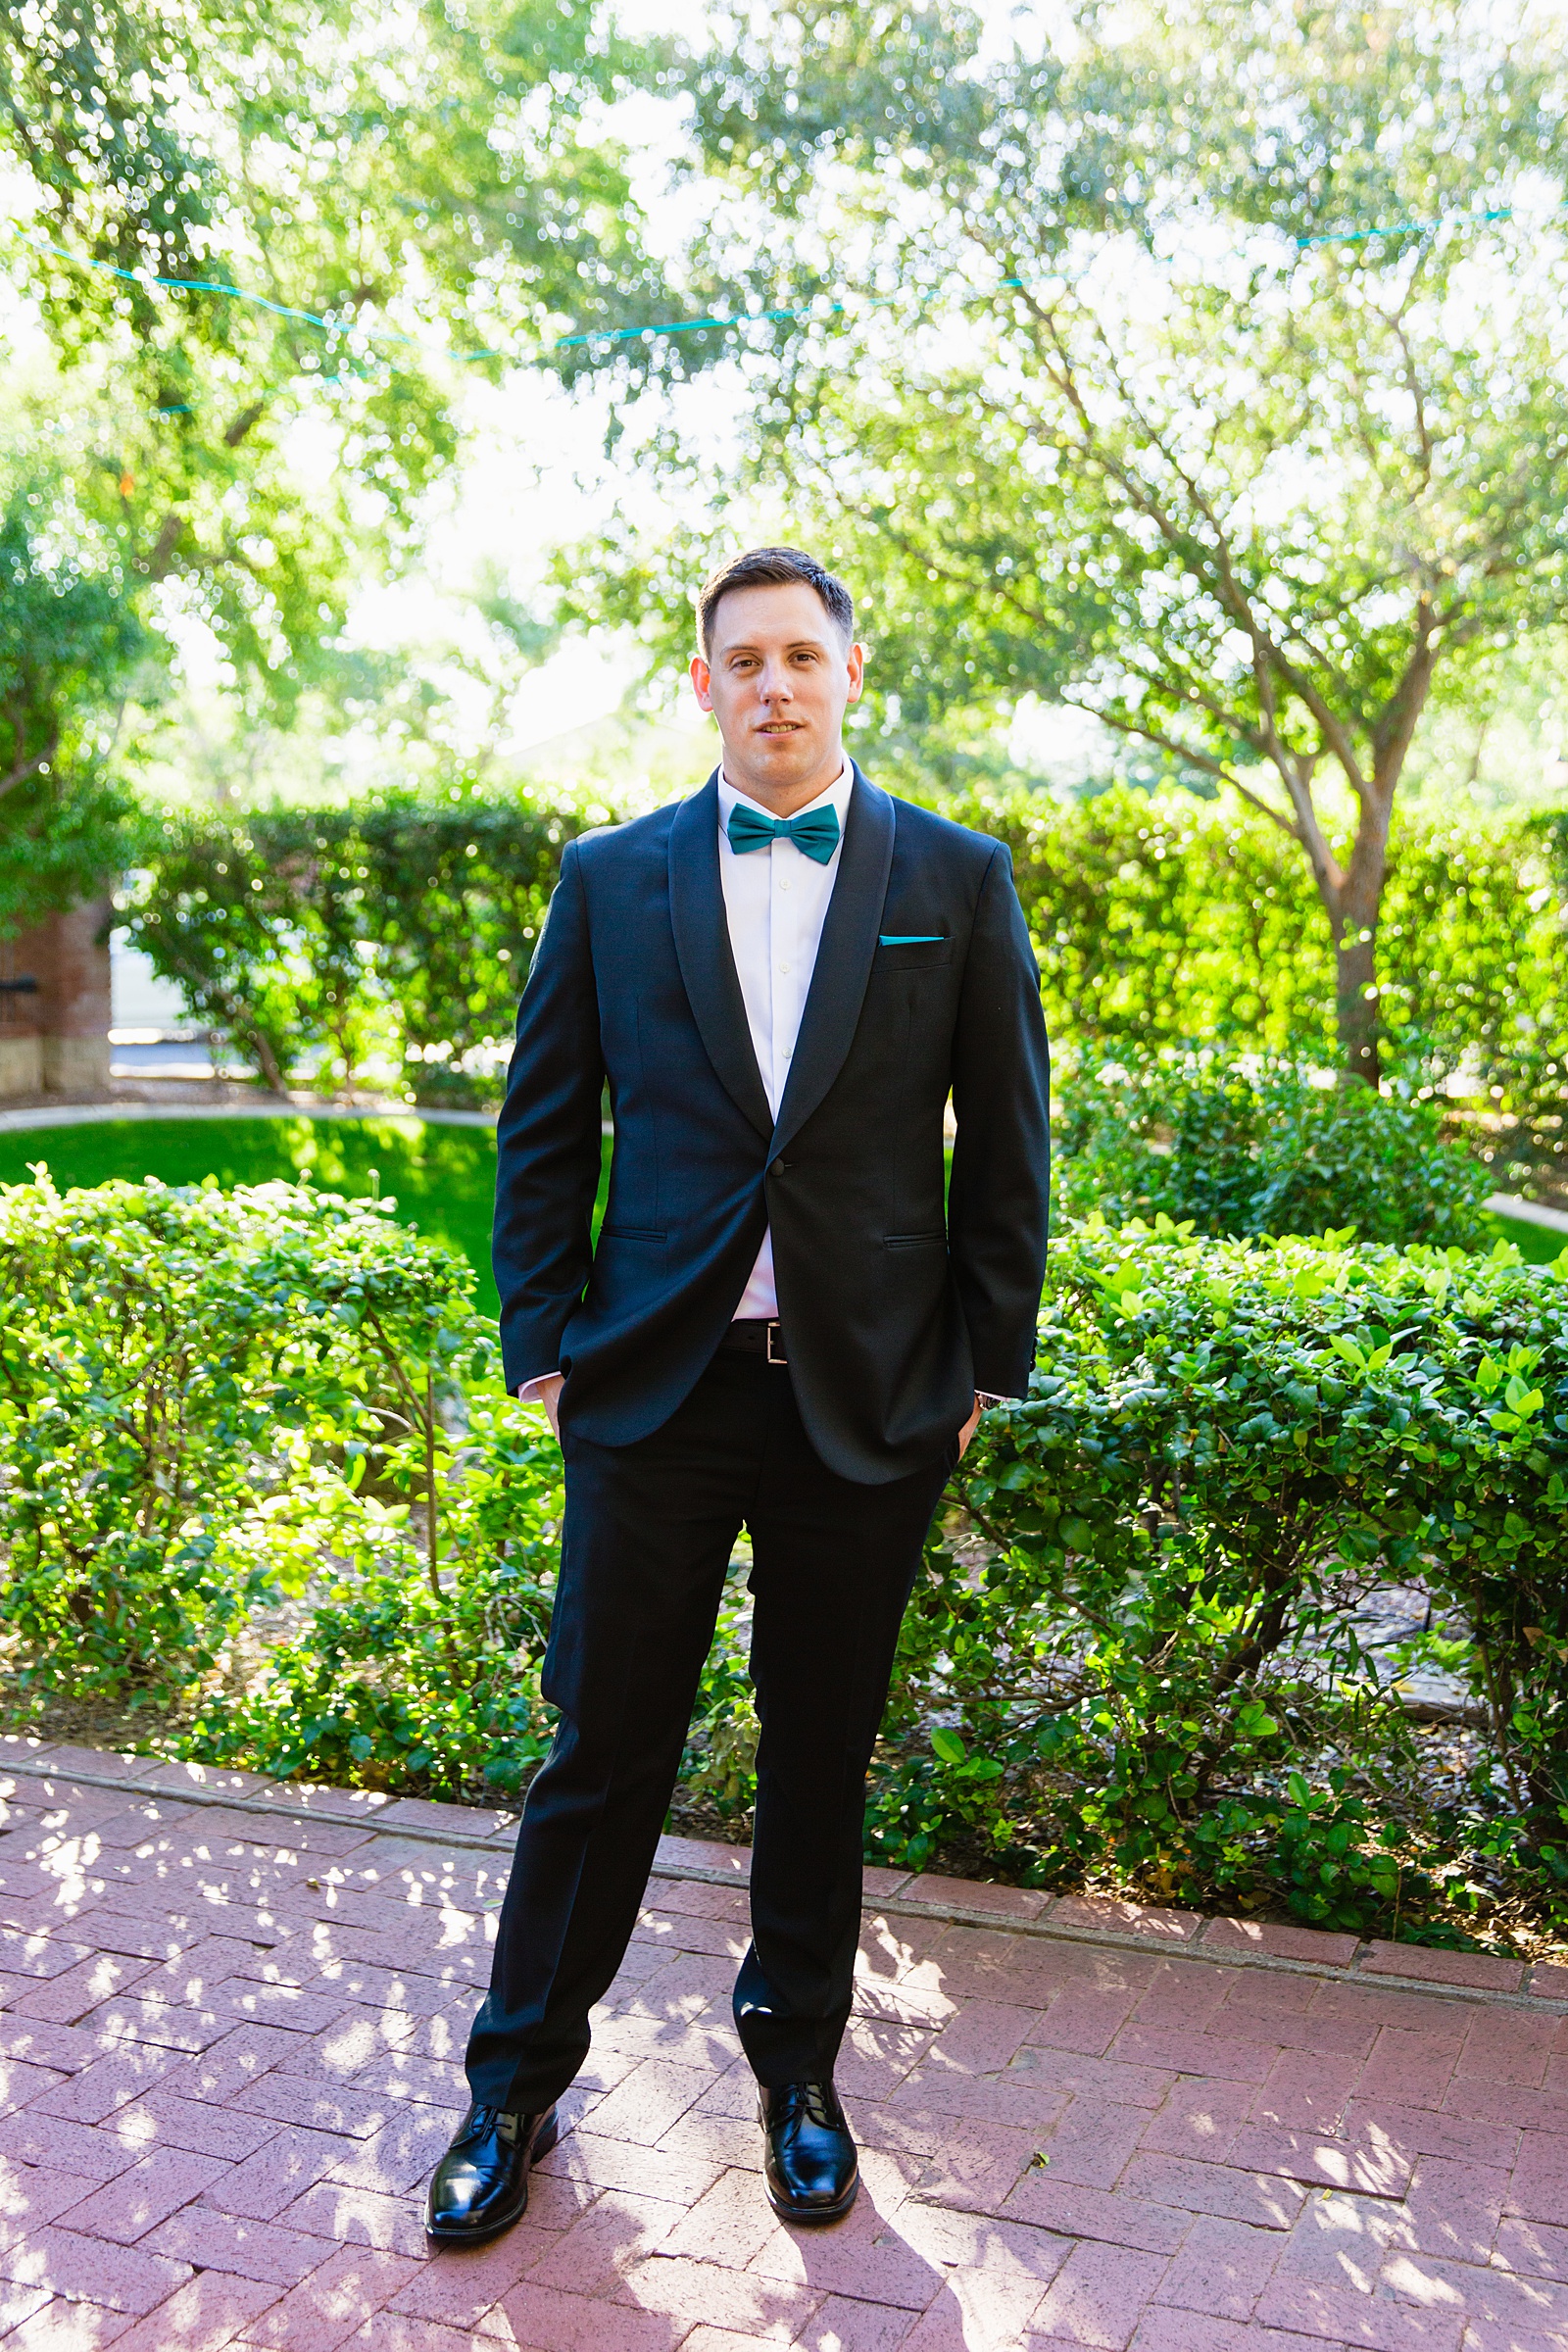 Groom's black suit with teal details suit for his Stonebridge Manor wedding by PMA Photography.